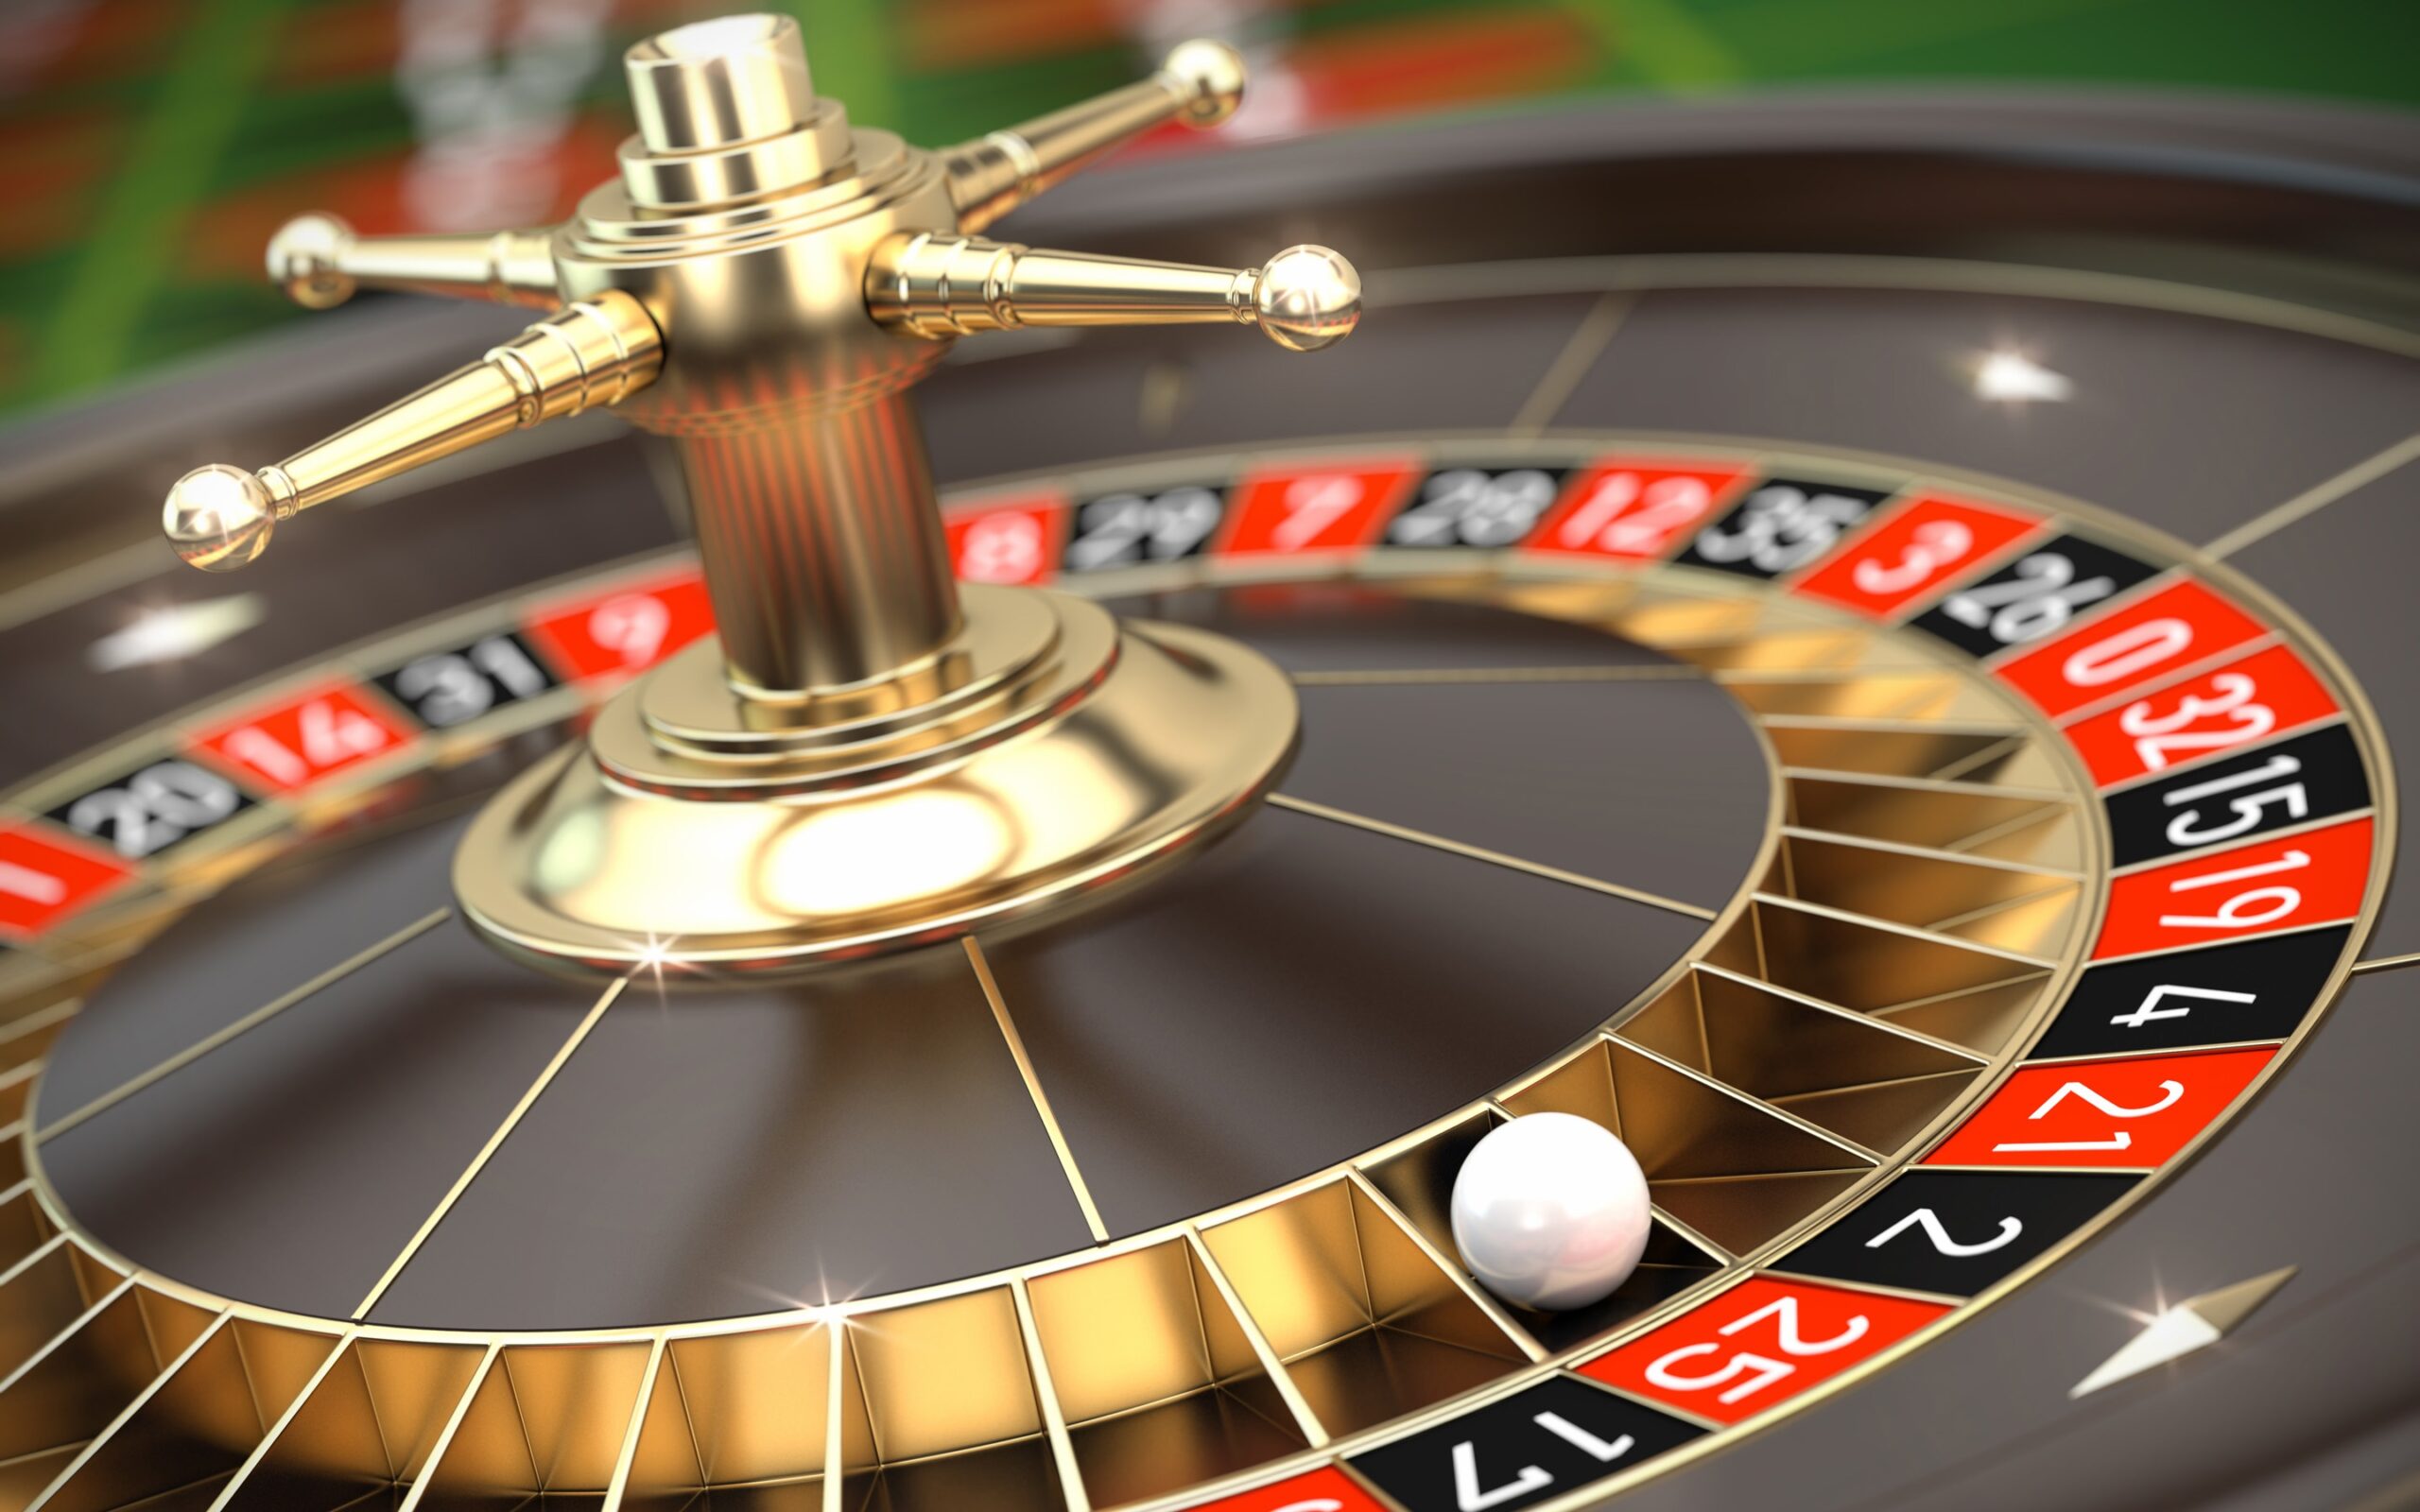 Register for Papi 4d Online Roulette Gambling with Lots of Prizes